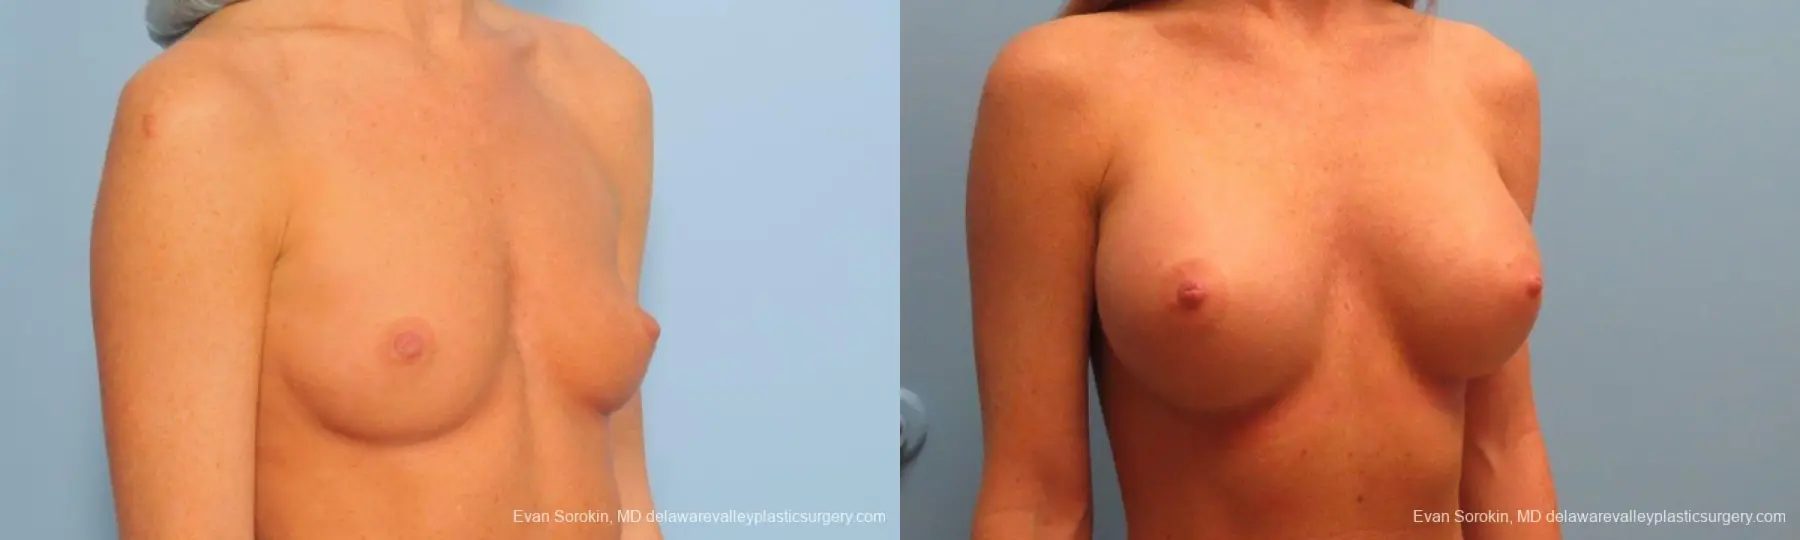 Philadelphia Breast Augmentation 9179 - Before and After 2